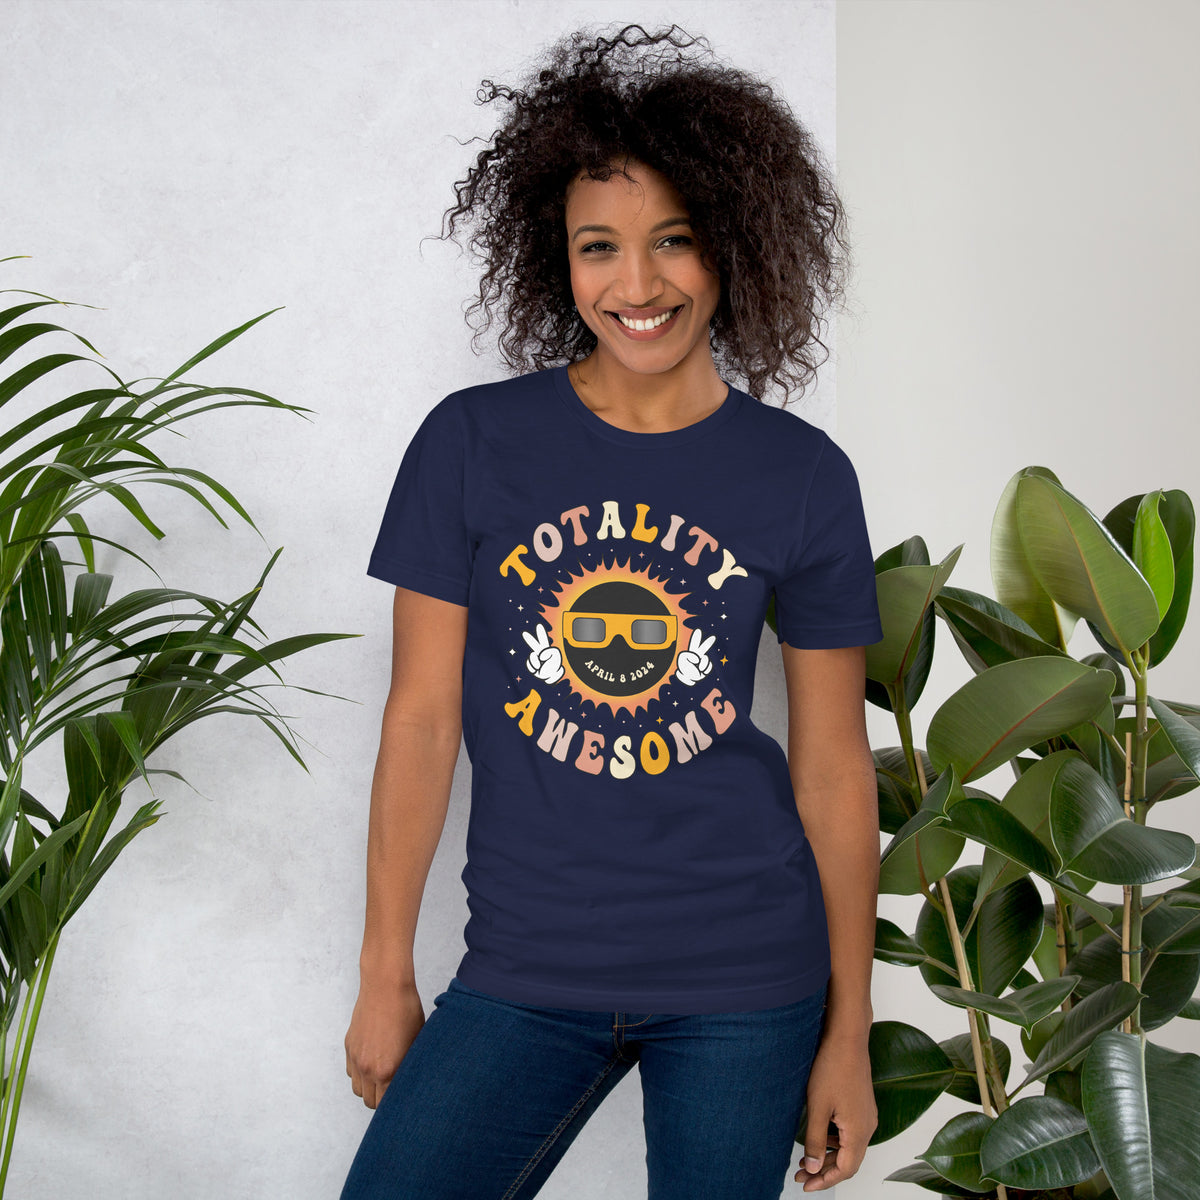 Totality Awesome Groovy Solar Eclipse T-Shirt, Funny Pun Celestial Event Party Tee